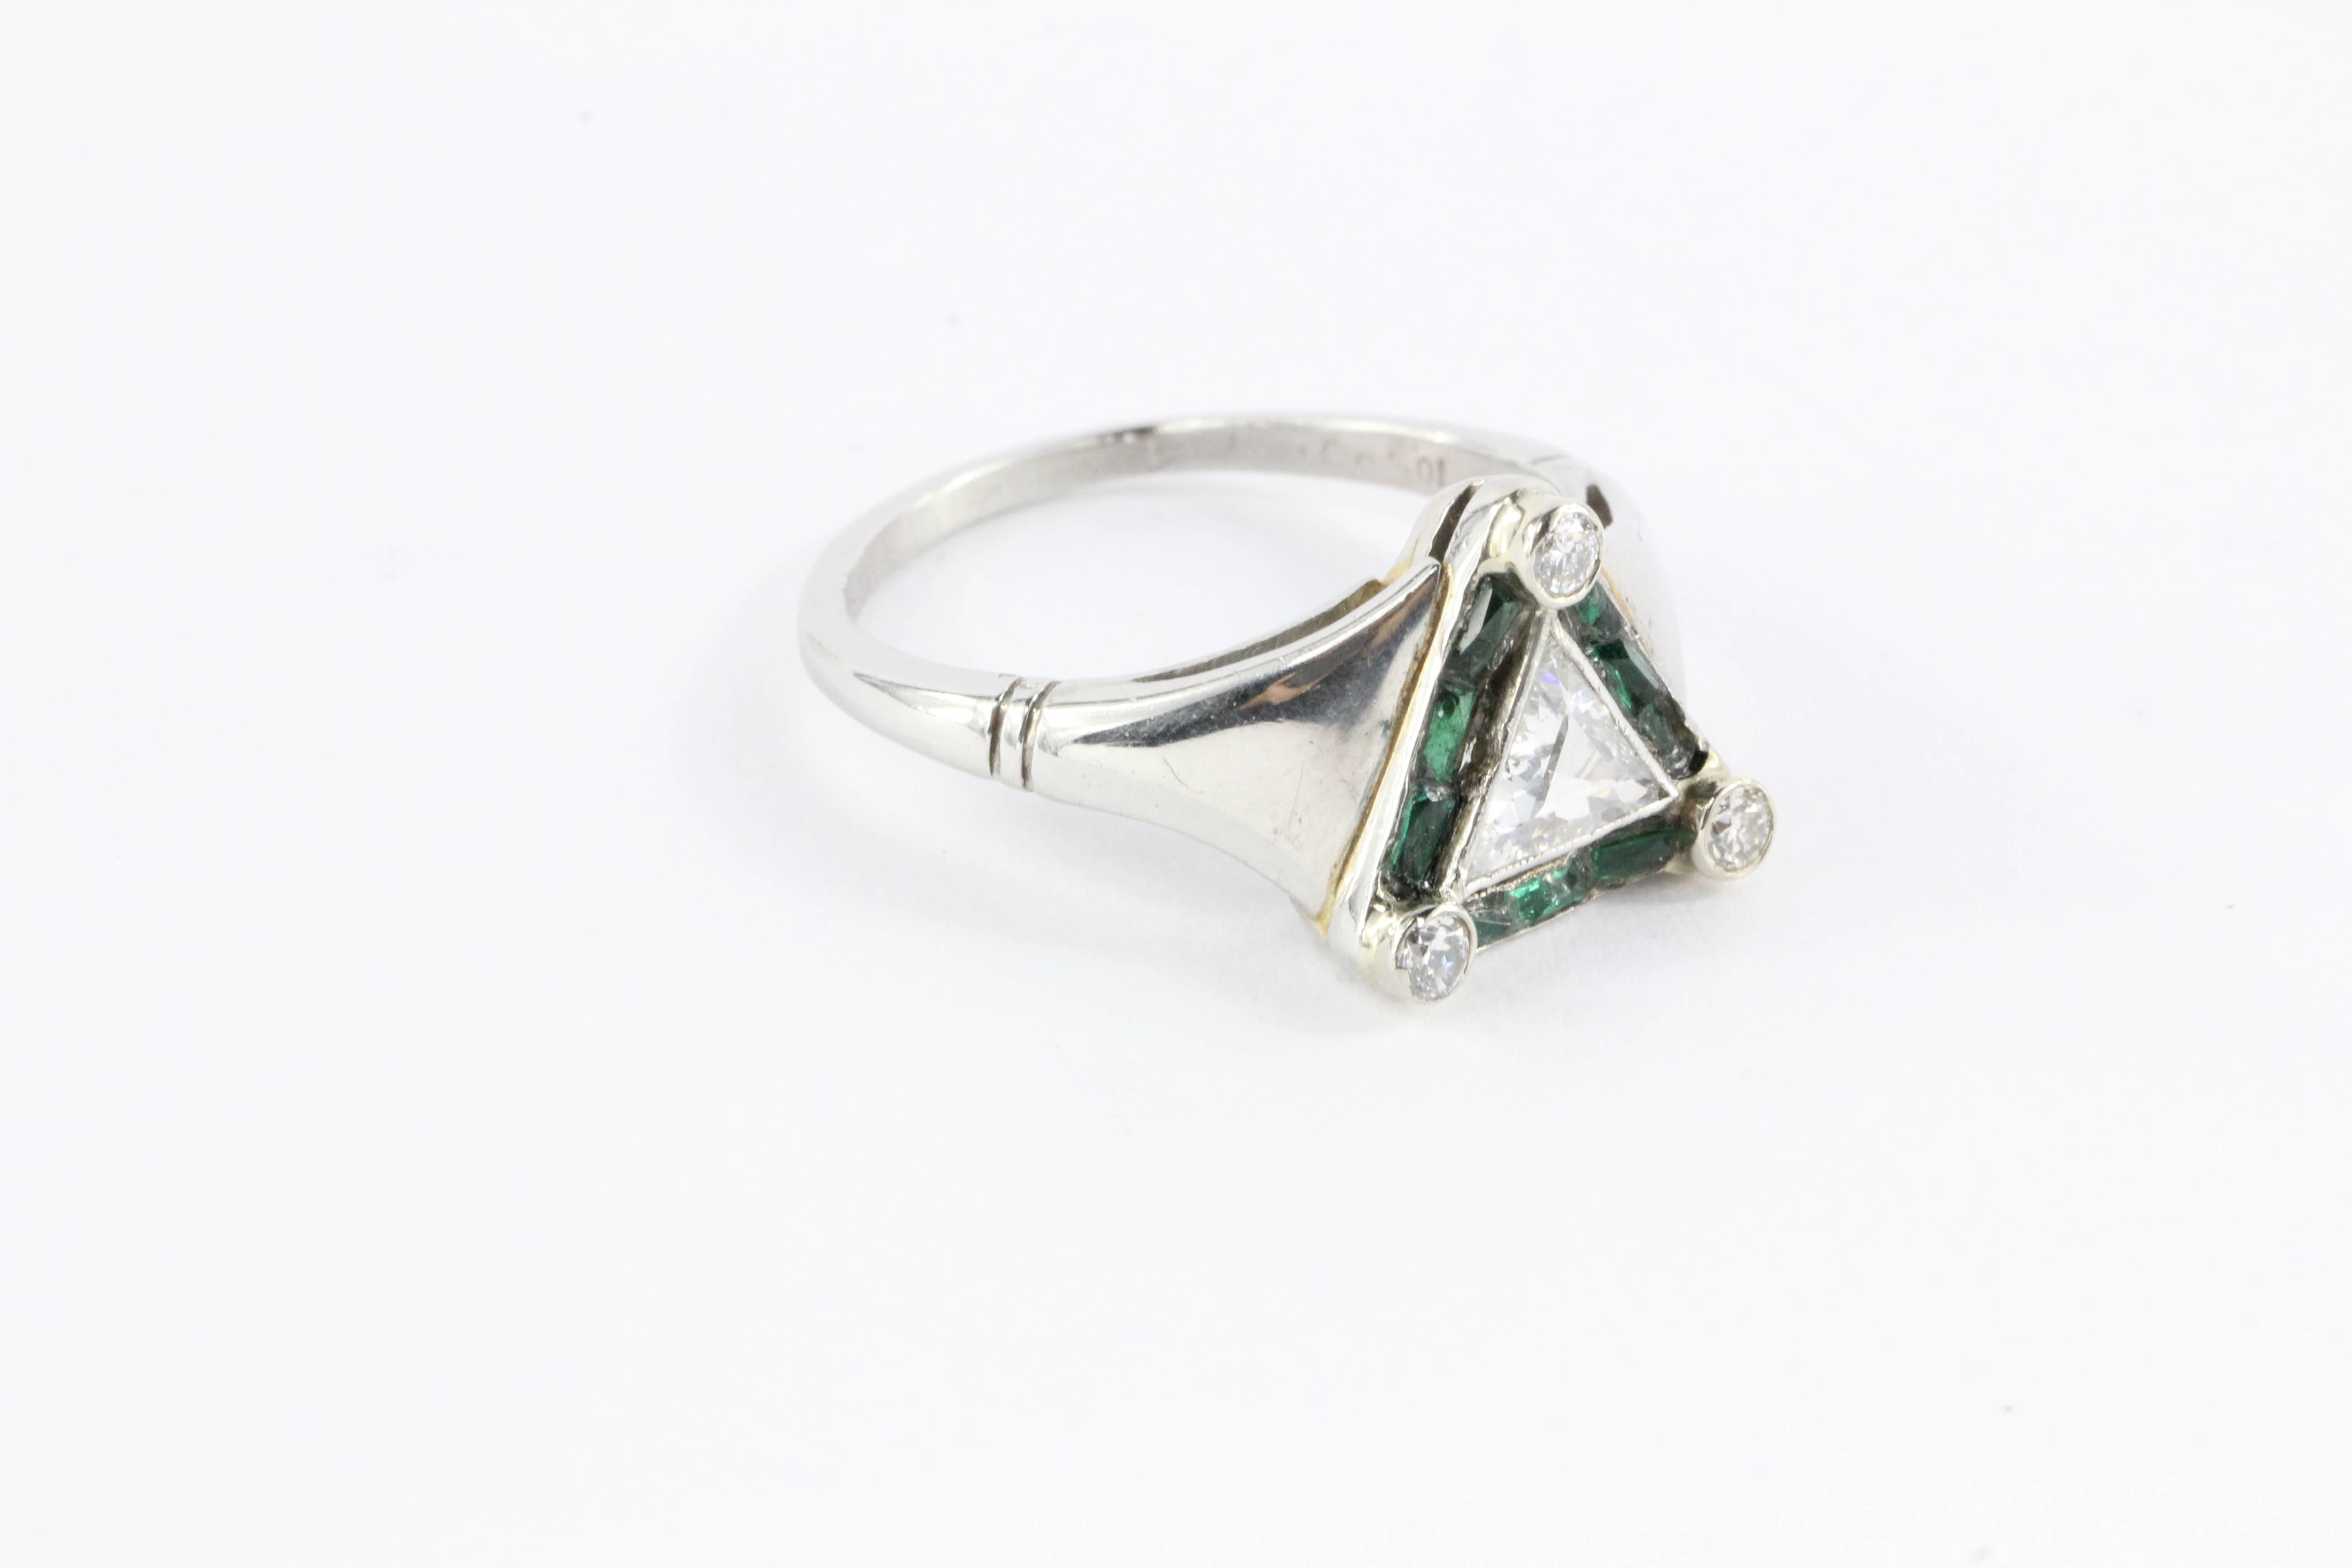 Exquisite and extremely hard to find antique authentic period Art Deco Platinum Trillion (Triangle) 1 Ct Diamond & Emerald Engagement Ring.  It is hallmarked 10% IRID.  The piece is most likely from the 1920's and was custom made. The center